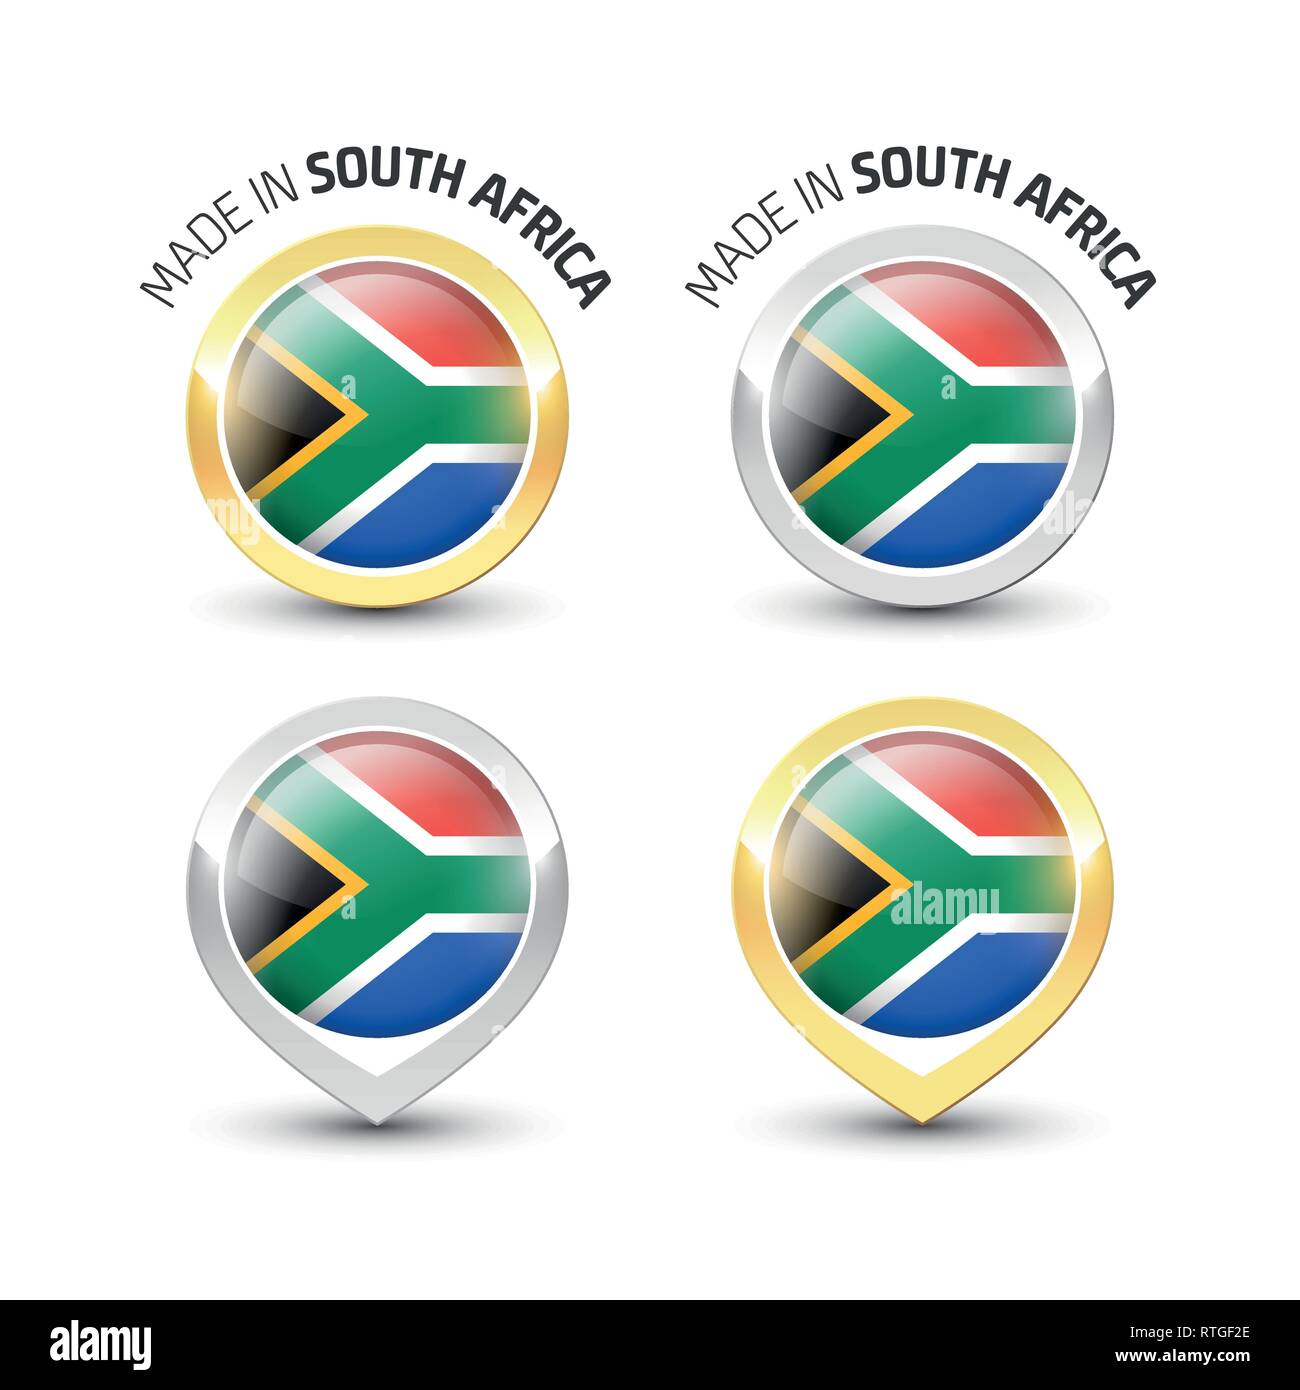 Made in South Africa - Guarantee label with the South African flag inside round gold and silver icons. Stock Vector